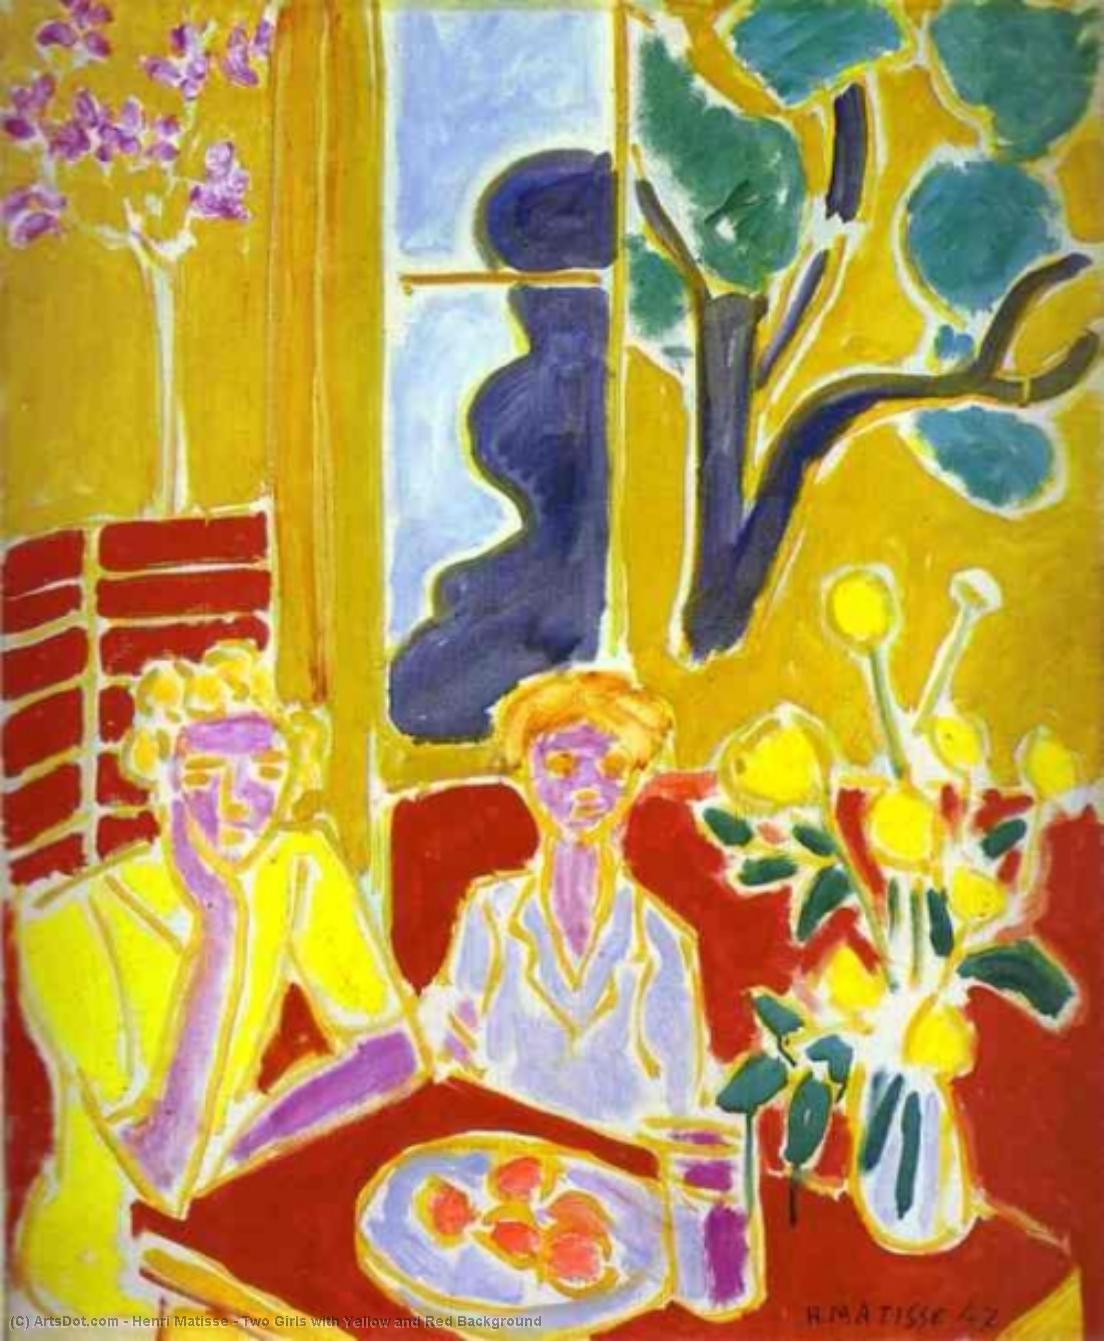 WikiOO.org - Encyclopedia of Fine Arts - Maľba, Artwork Henri Matisse - Two Girls with Yellow and Red Background